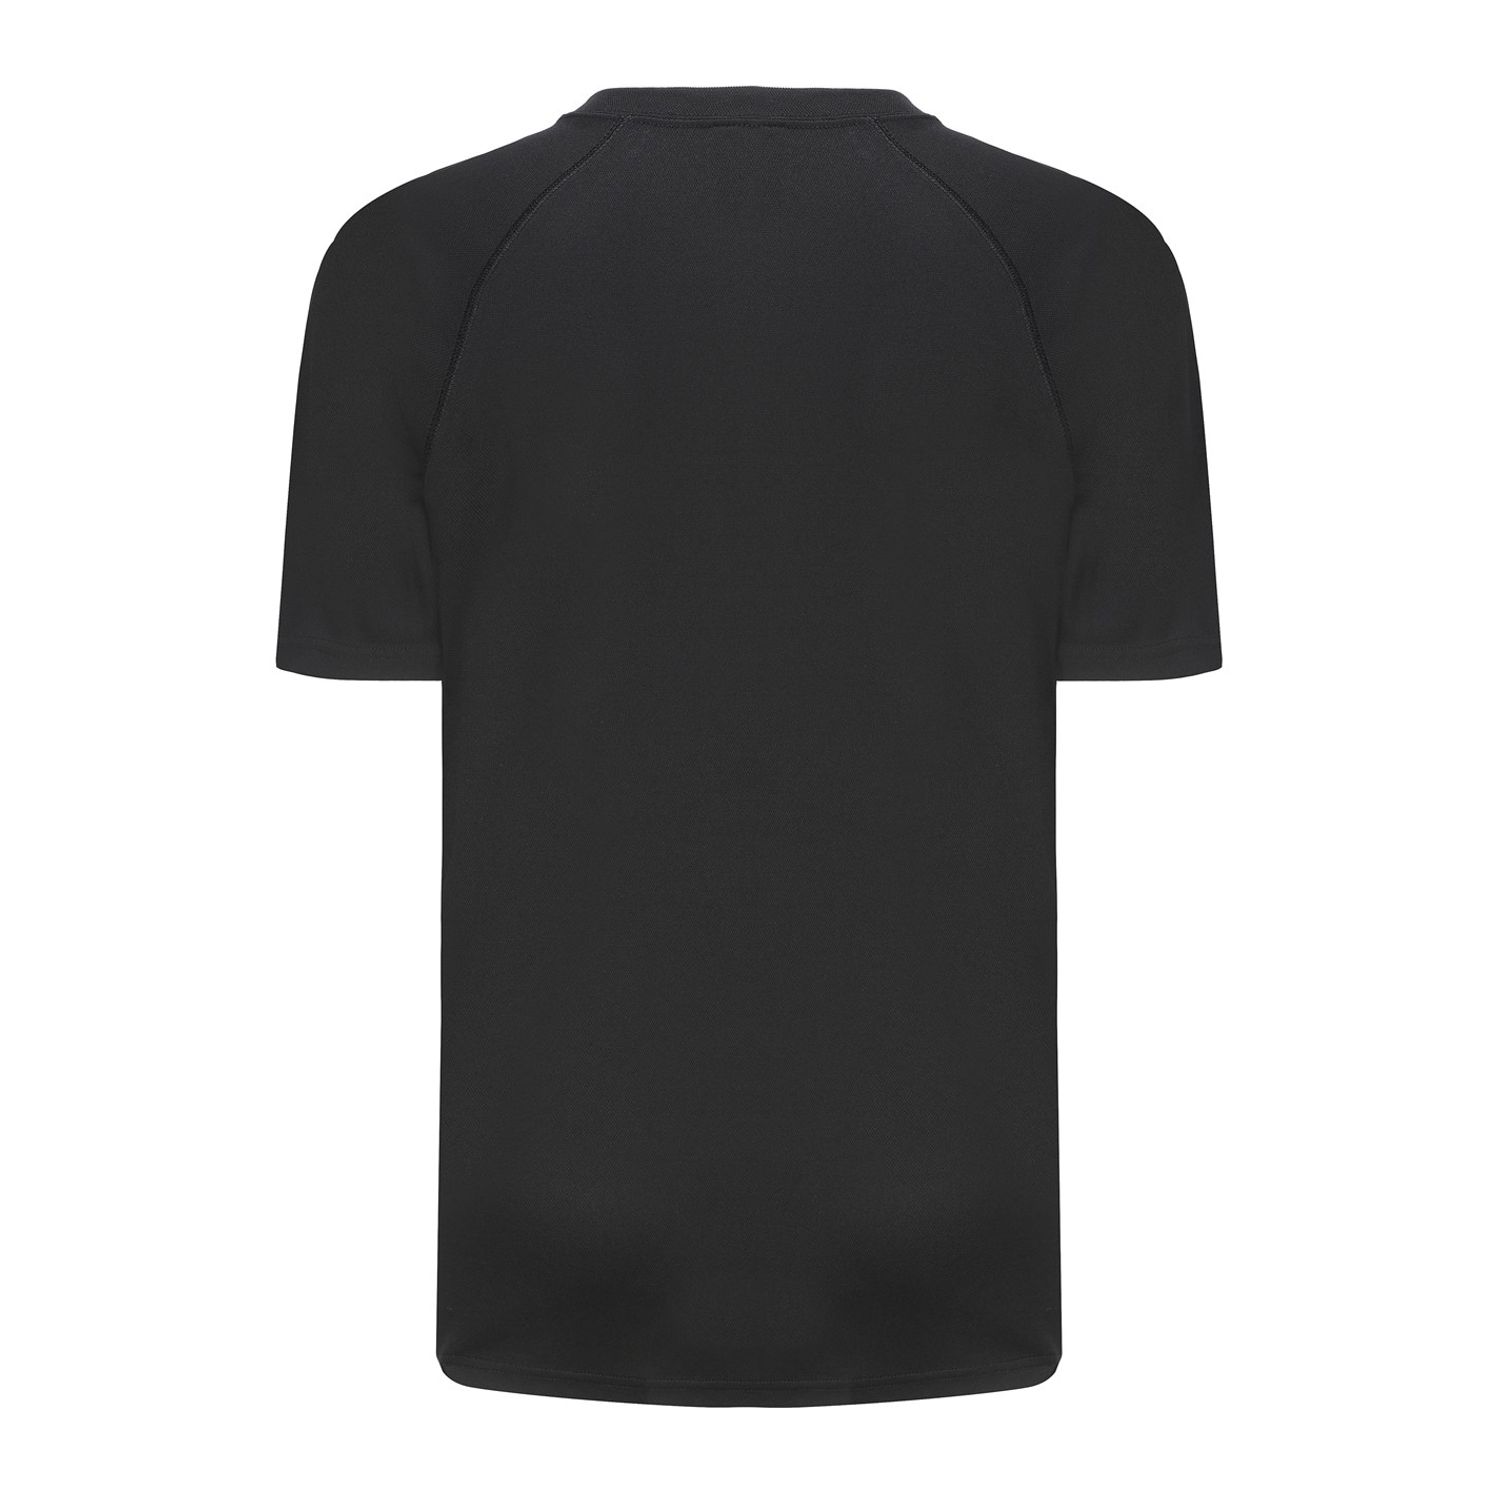 Black Donnay T-Shirt - Get The Label